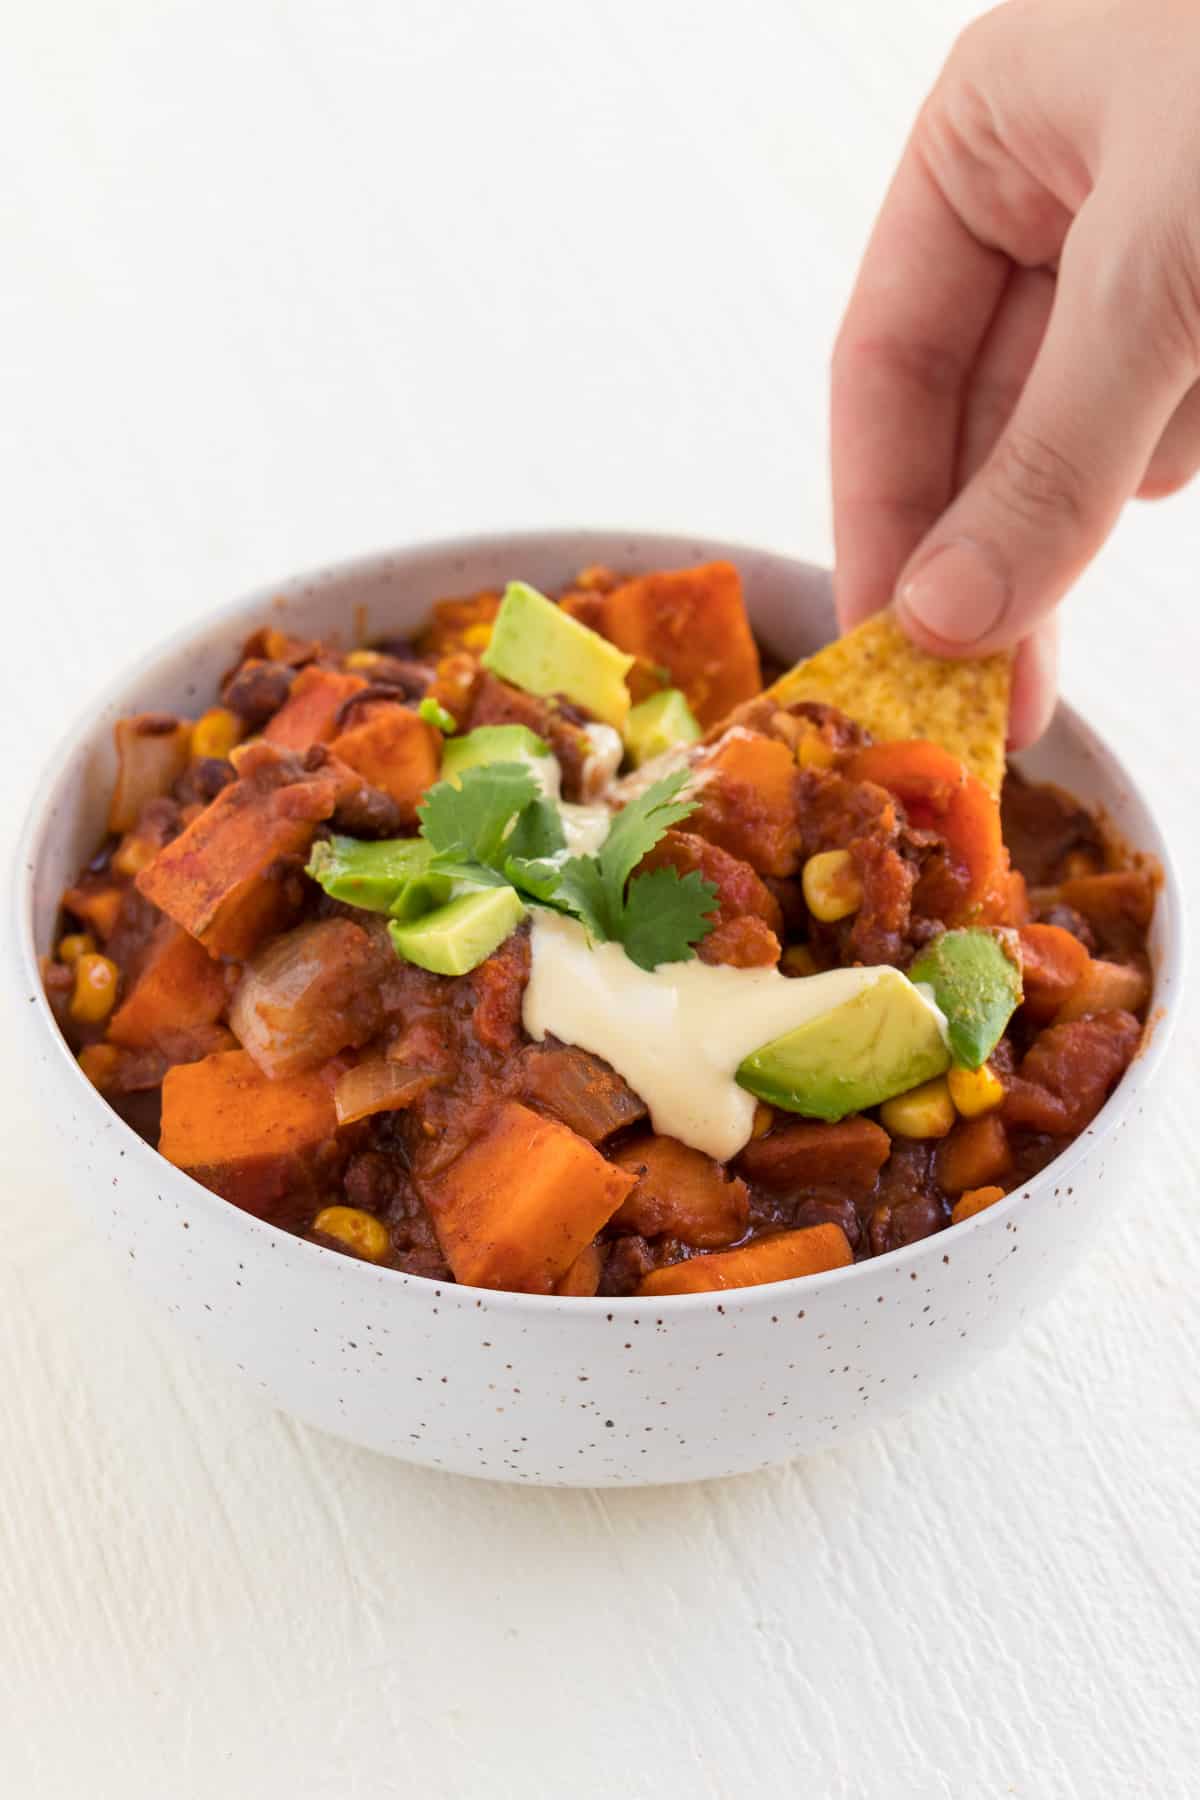 a hand holding a tortilla chip to scoop a bite of vegan chili